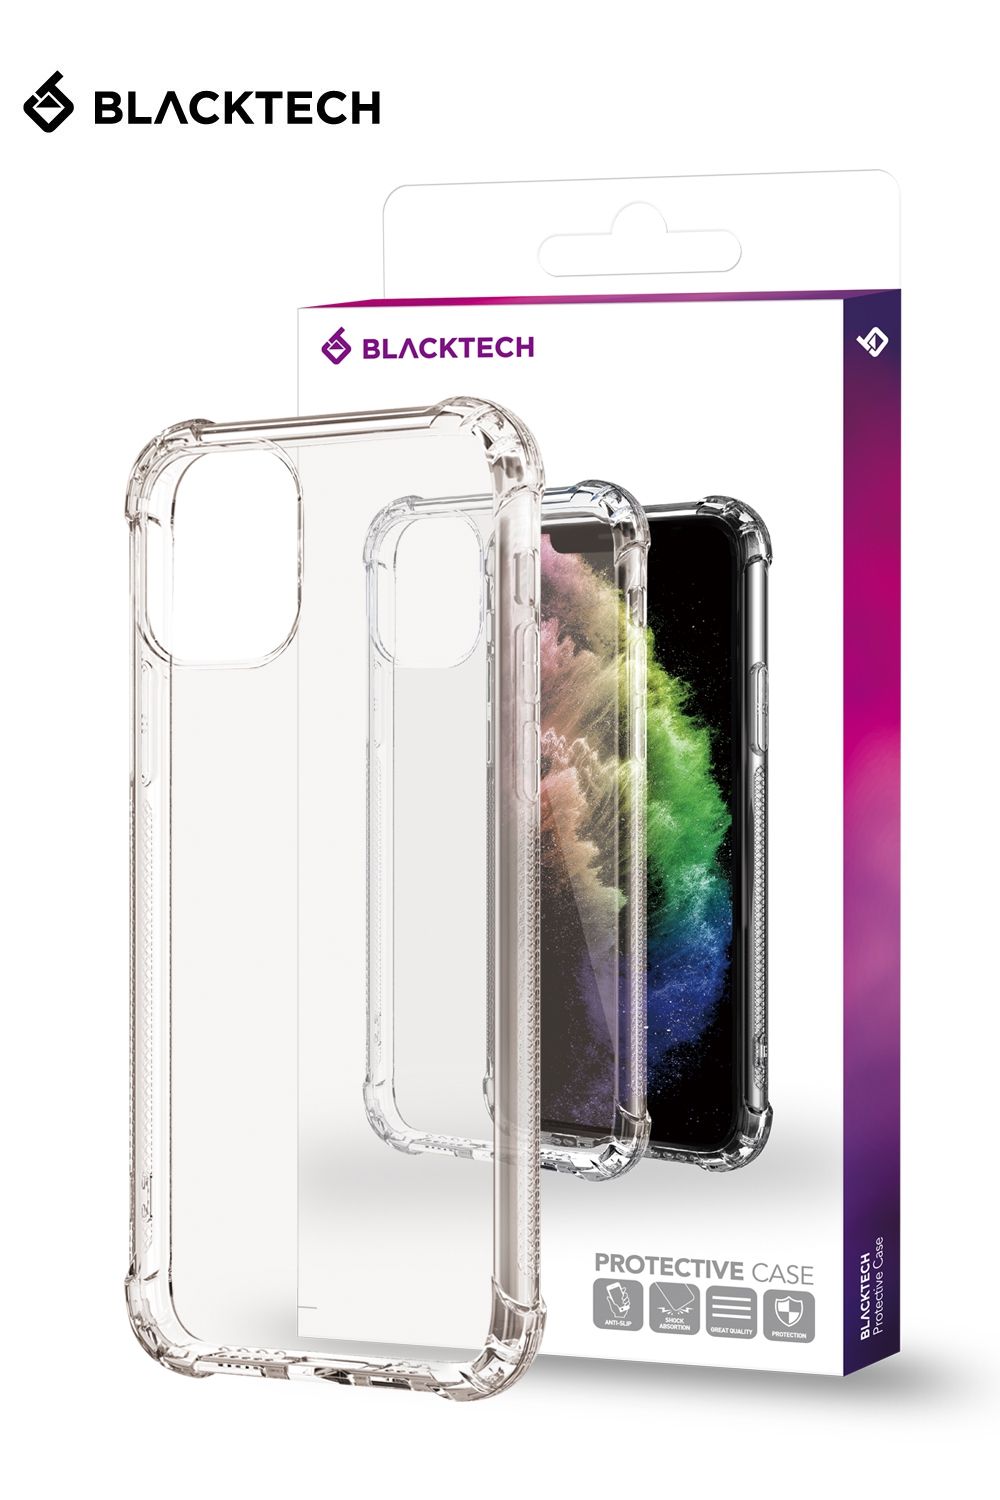 iPhone 6/6S BLACKTECH Hard Protective Case - Clear